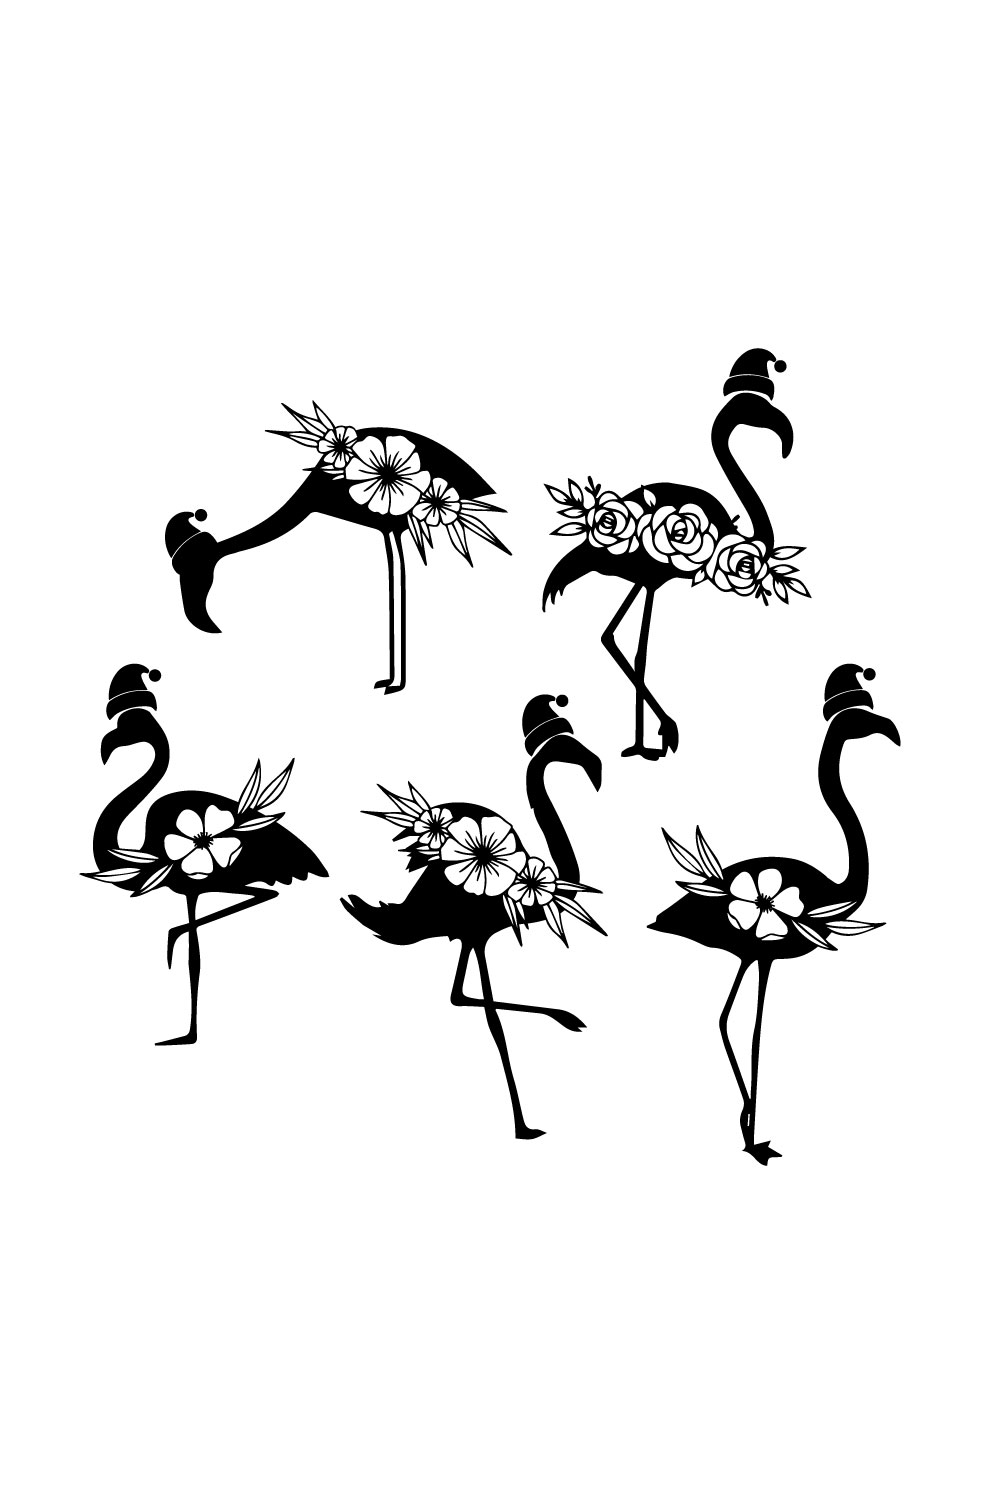 A selection of beautiful black images of flamingos